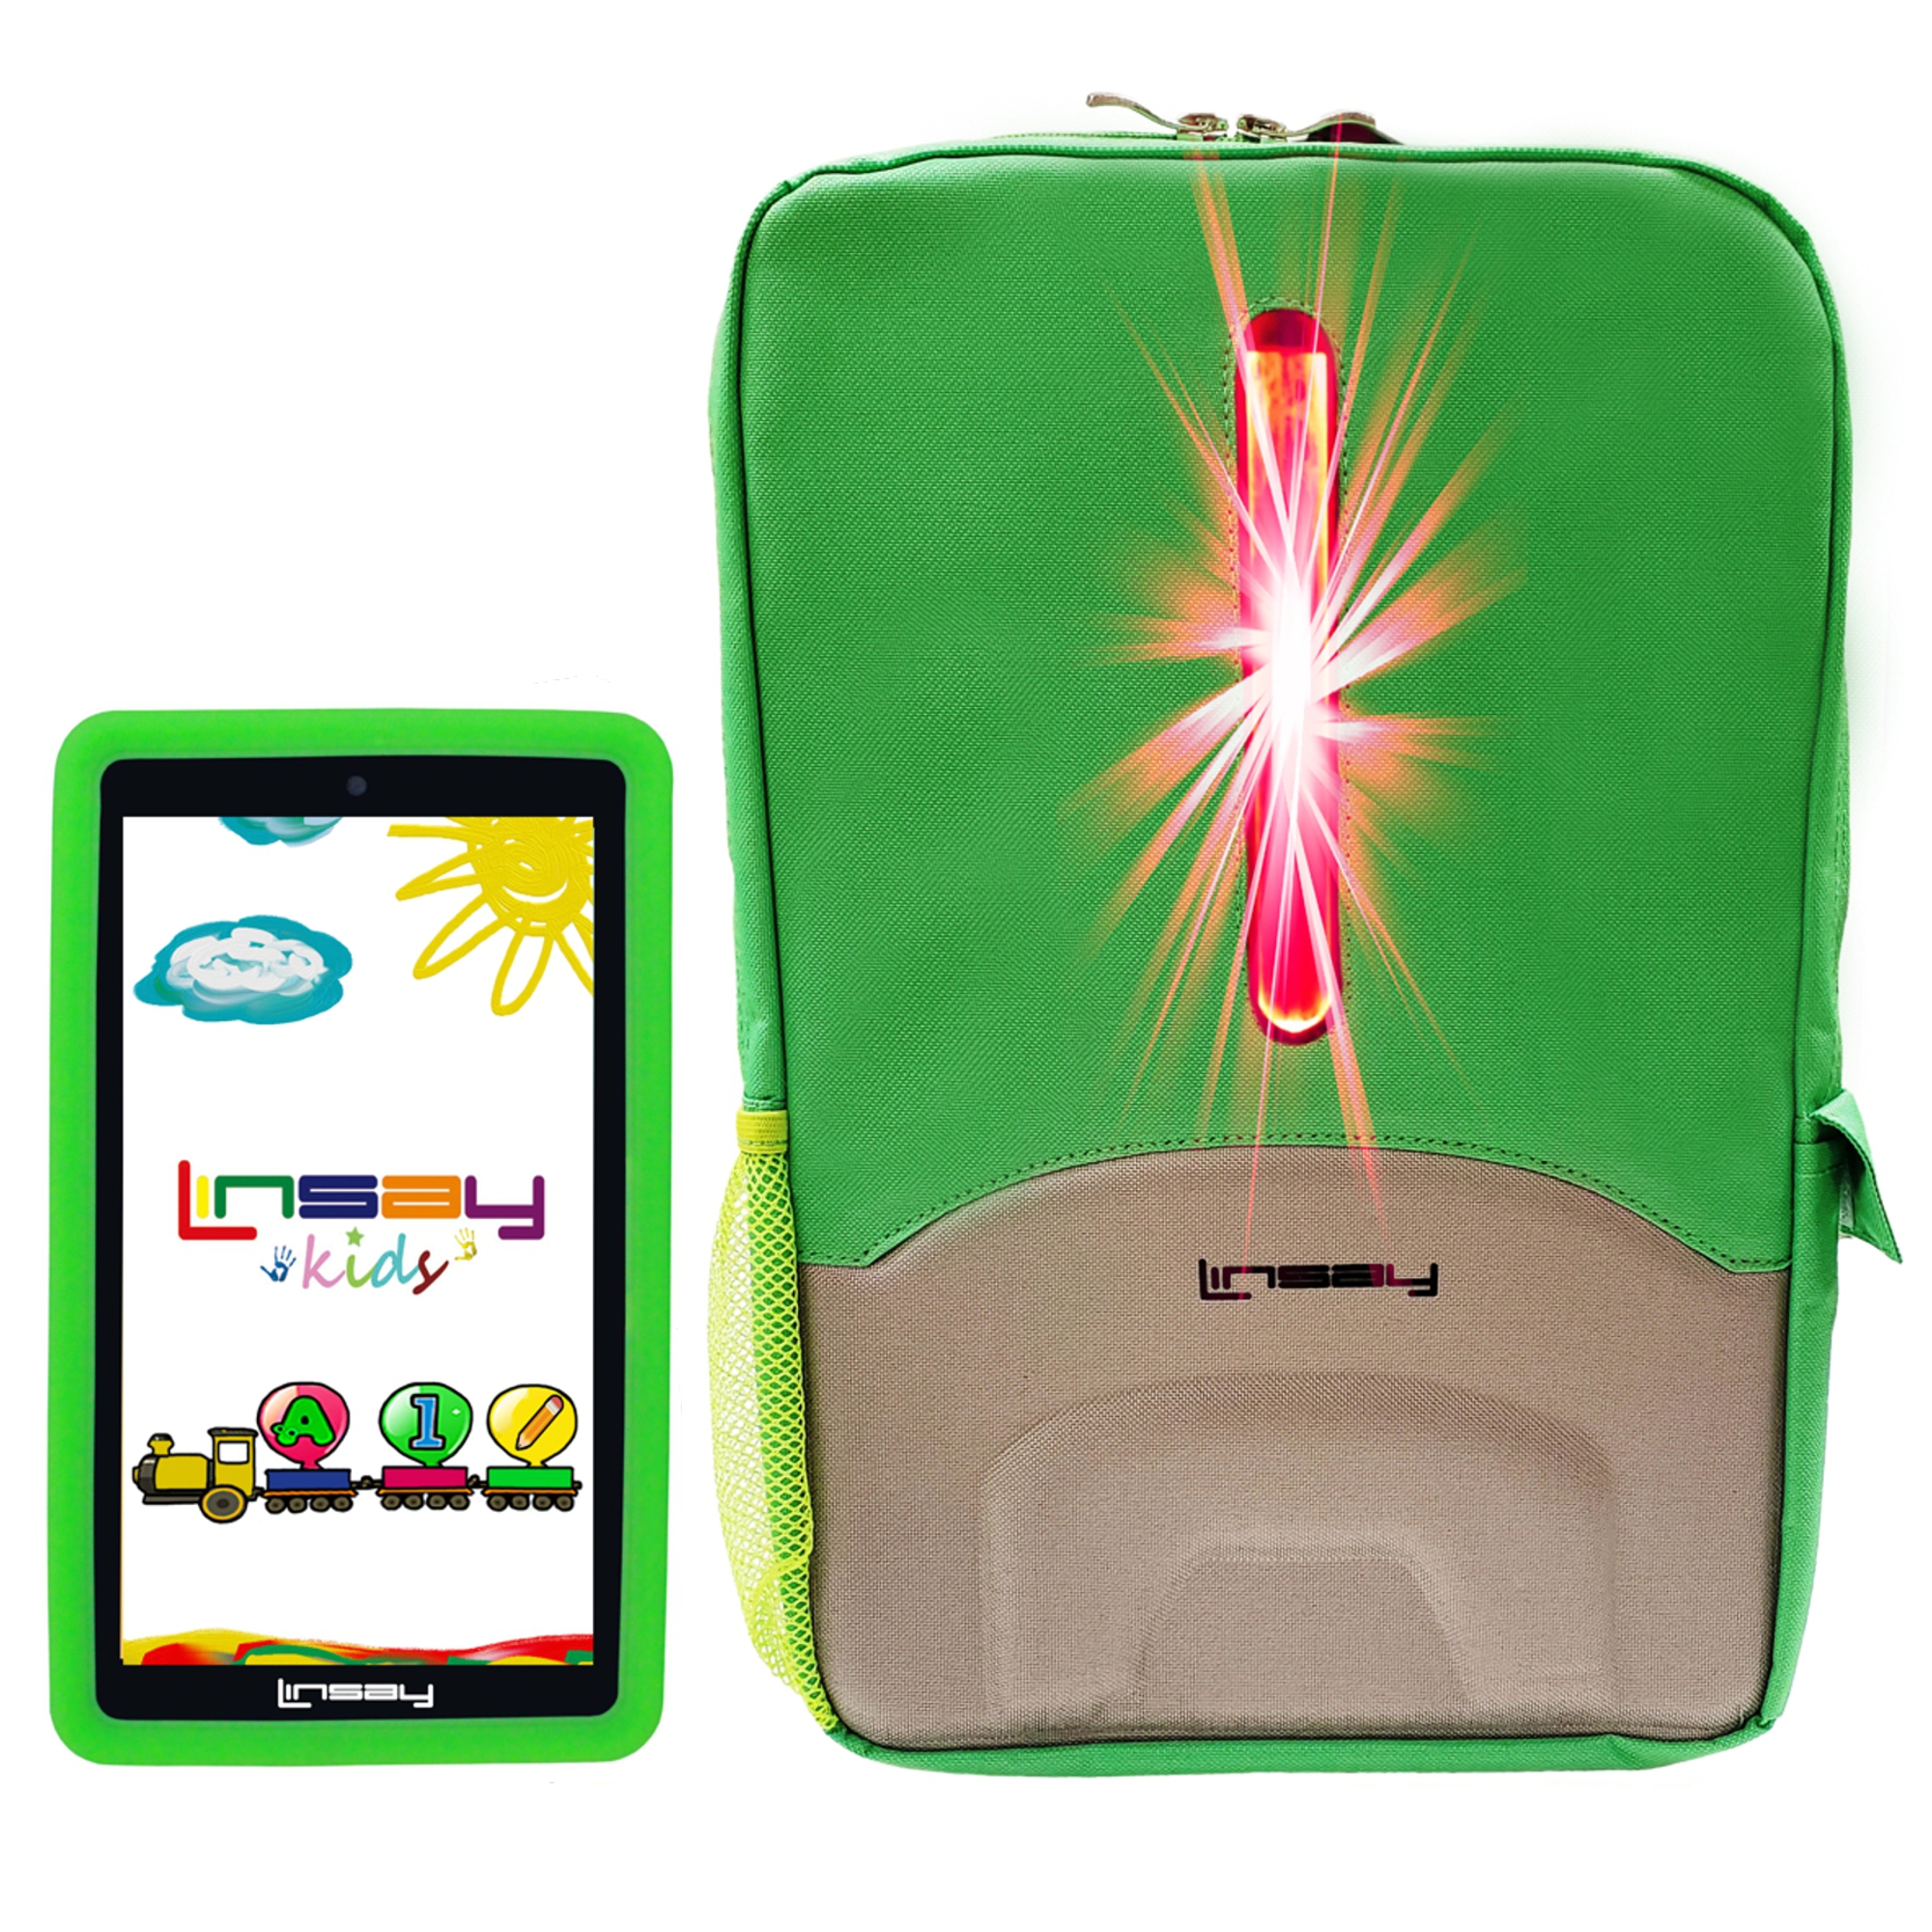 LINSAY 7" Kids Tablet 2GB RAM 32GB Android 12 WiFi Tablet for Children, Camera, Apps, Games, with Green Kid Defender Case LED Book Pack - image 1 of 7